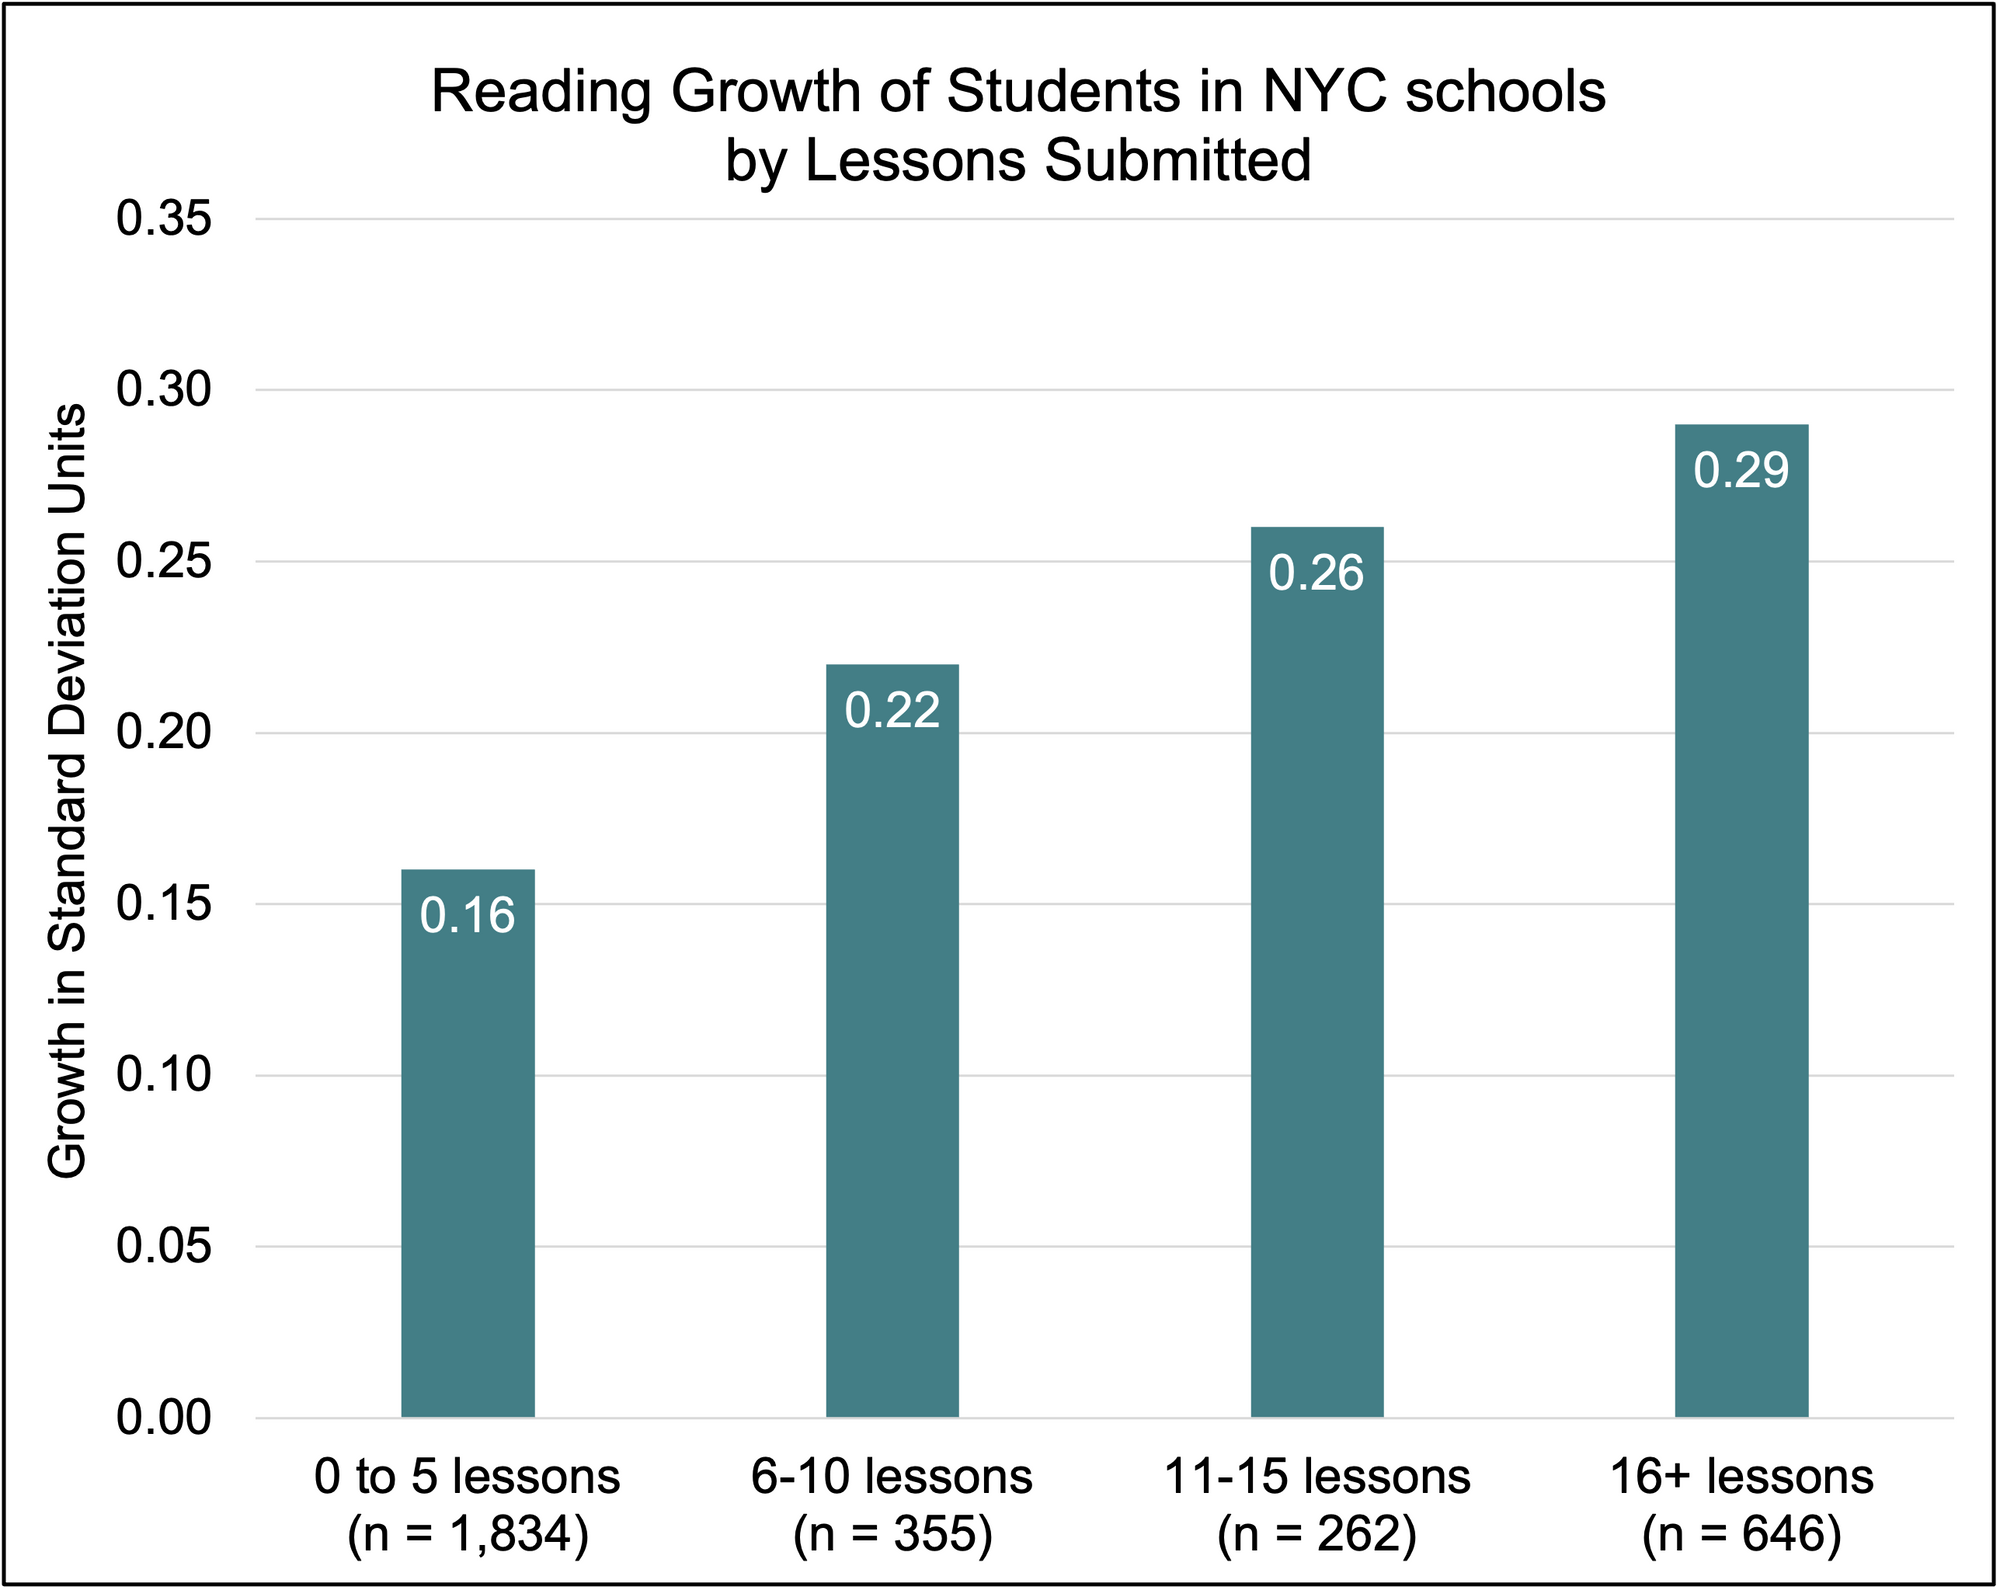 Reading growth that shows number of lessons submitted and reading gains